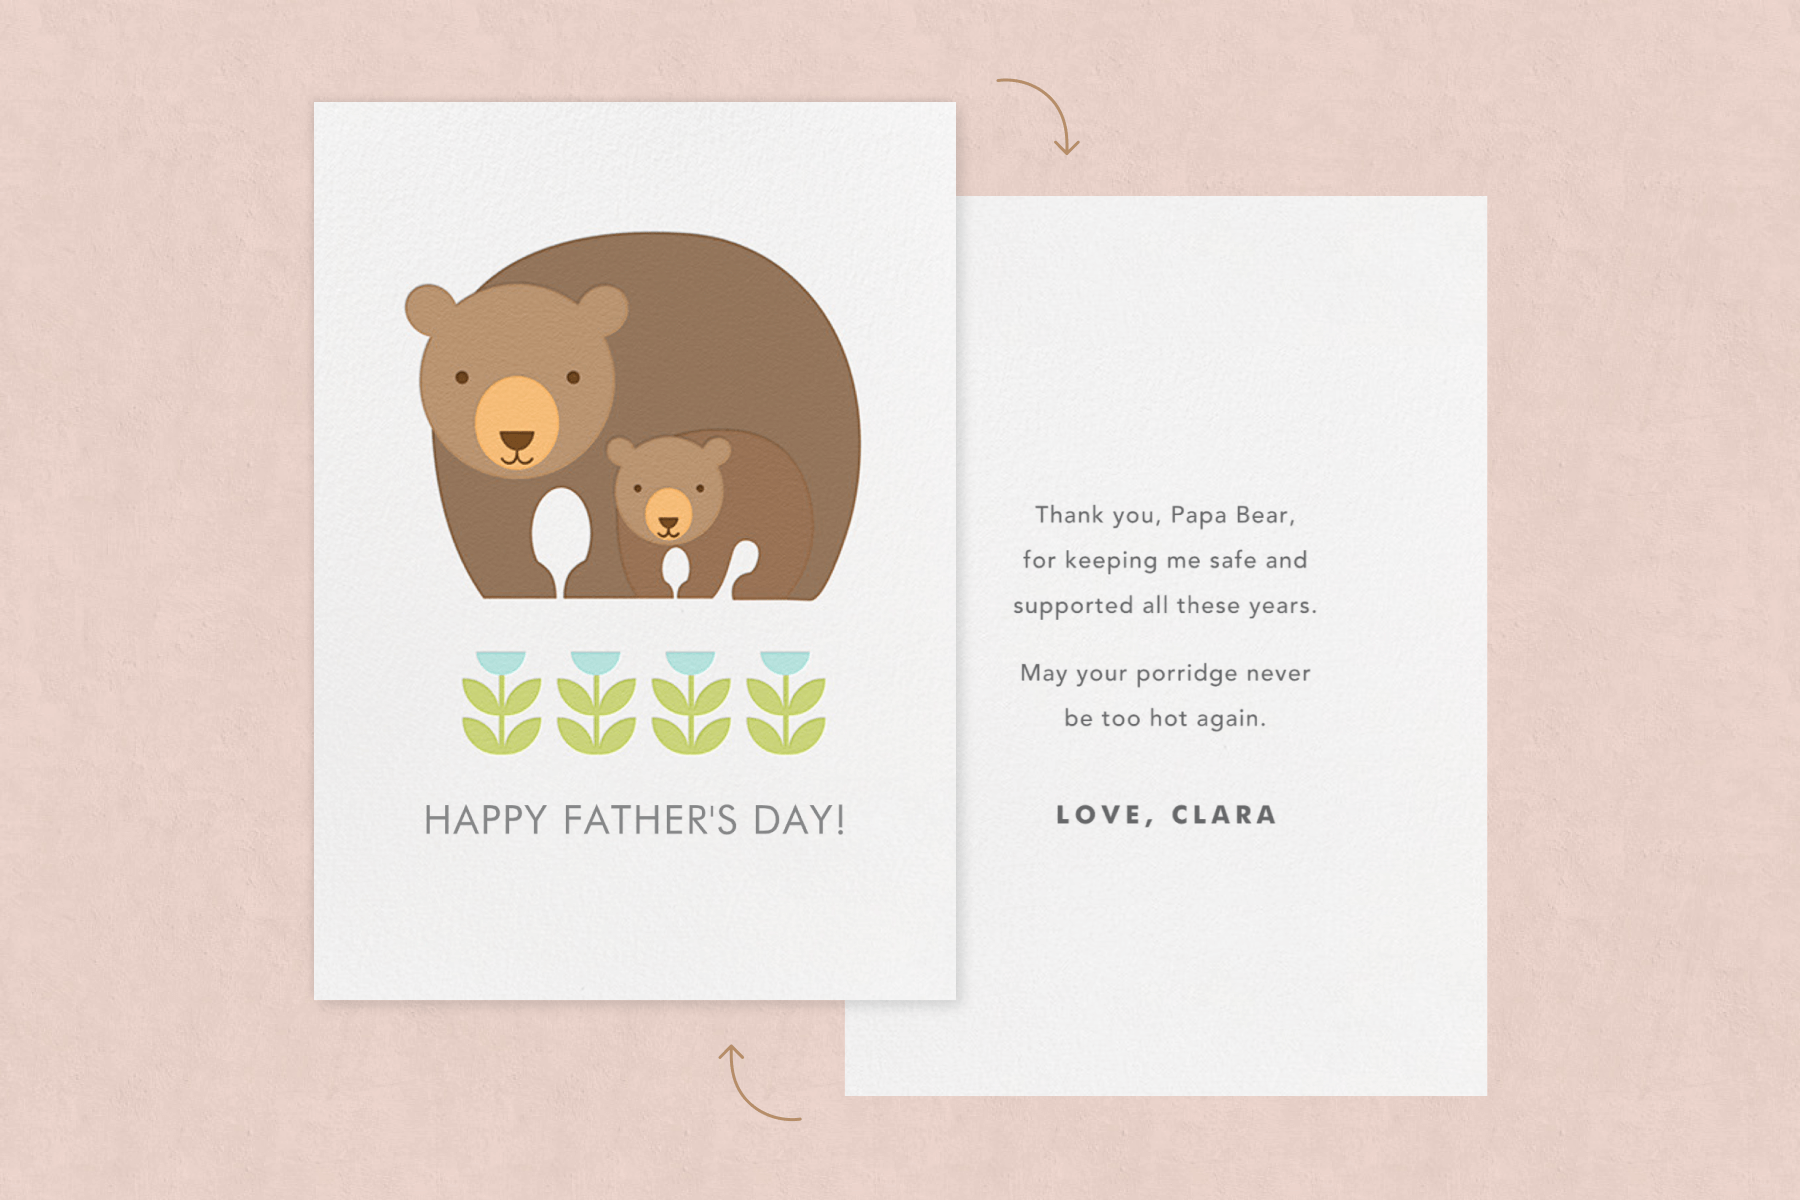 A Father’s Day card featuring an illustration with a papa and baby bear with the words “Happy Father’s Day!” The back of the card is also shown with a sample message also listed in the suggestions below.